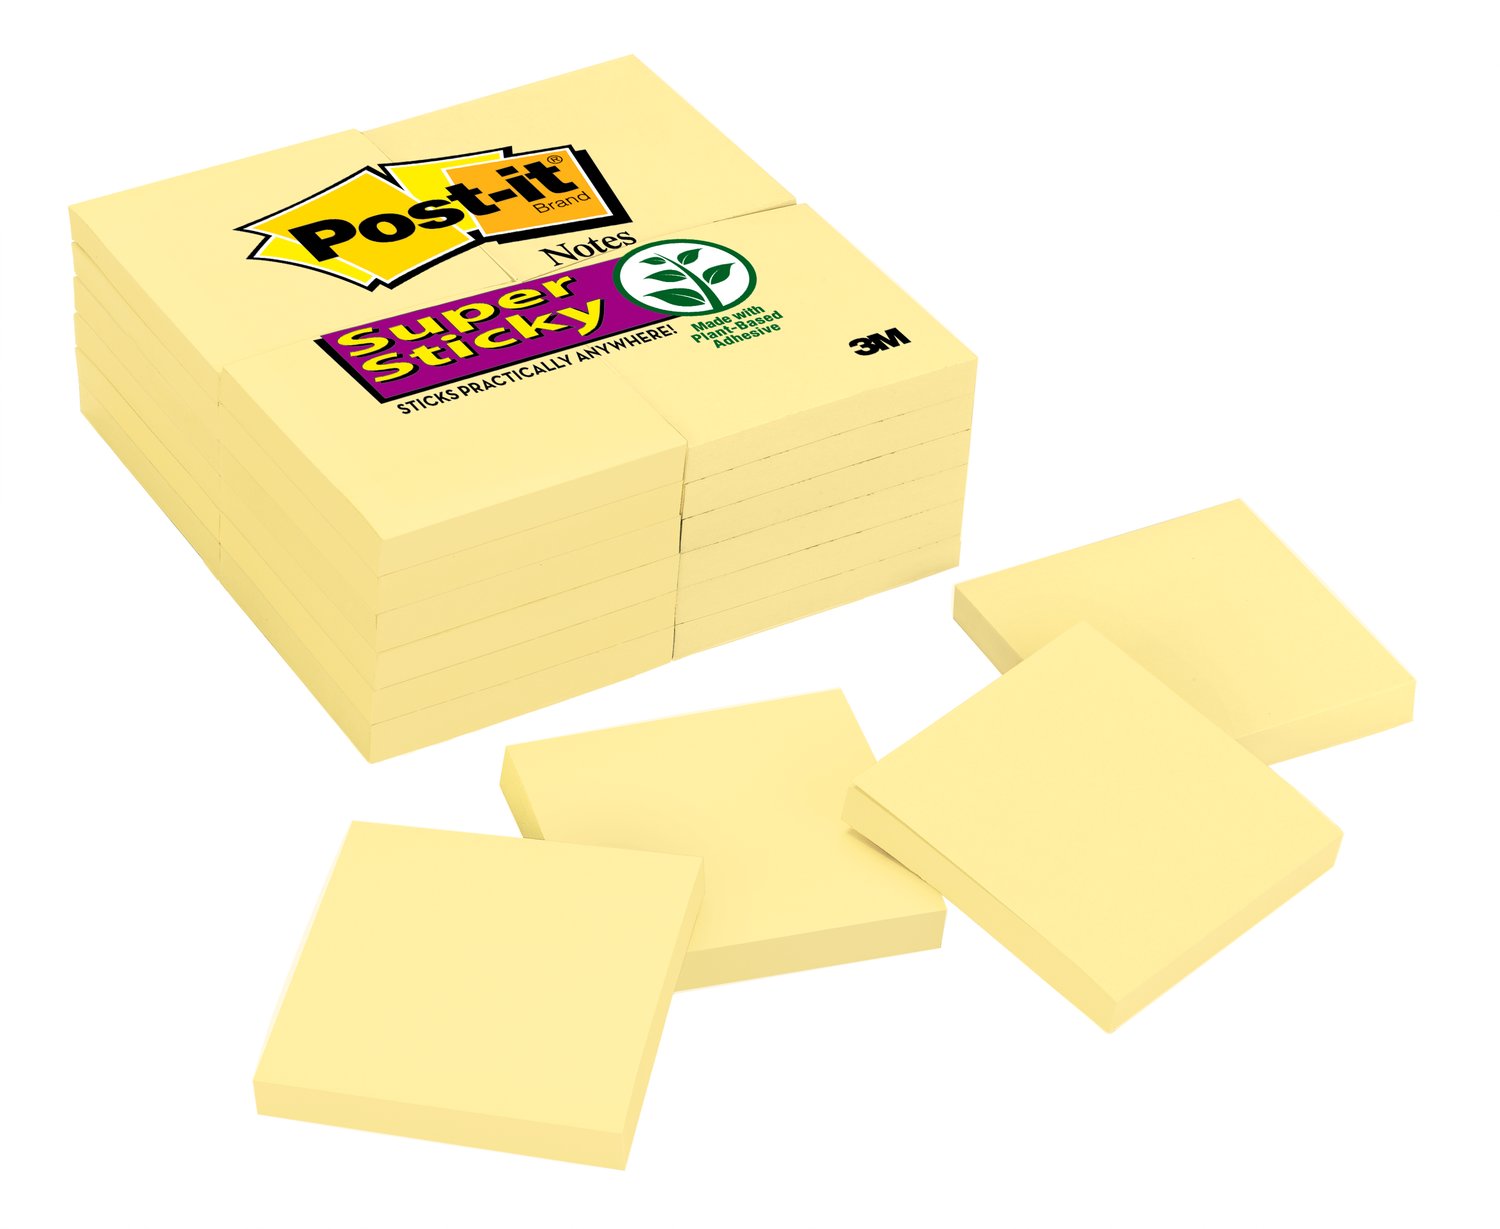 7100237032 - Post-it Super Sticky Notes 654-24SSCY, 3 in x 3 in (76 mm x 76 mm), Canary Yellow